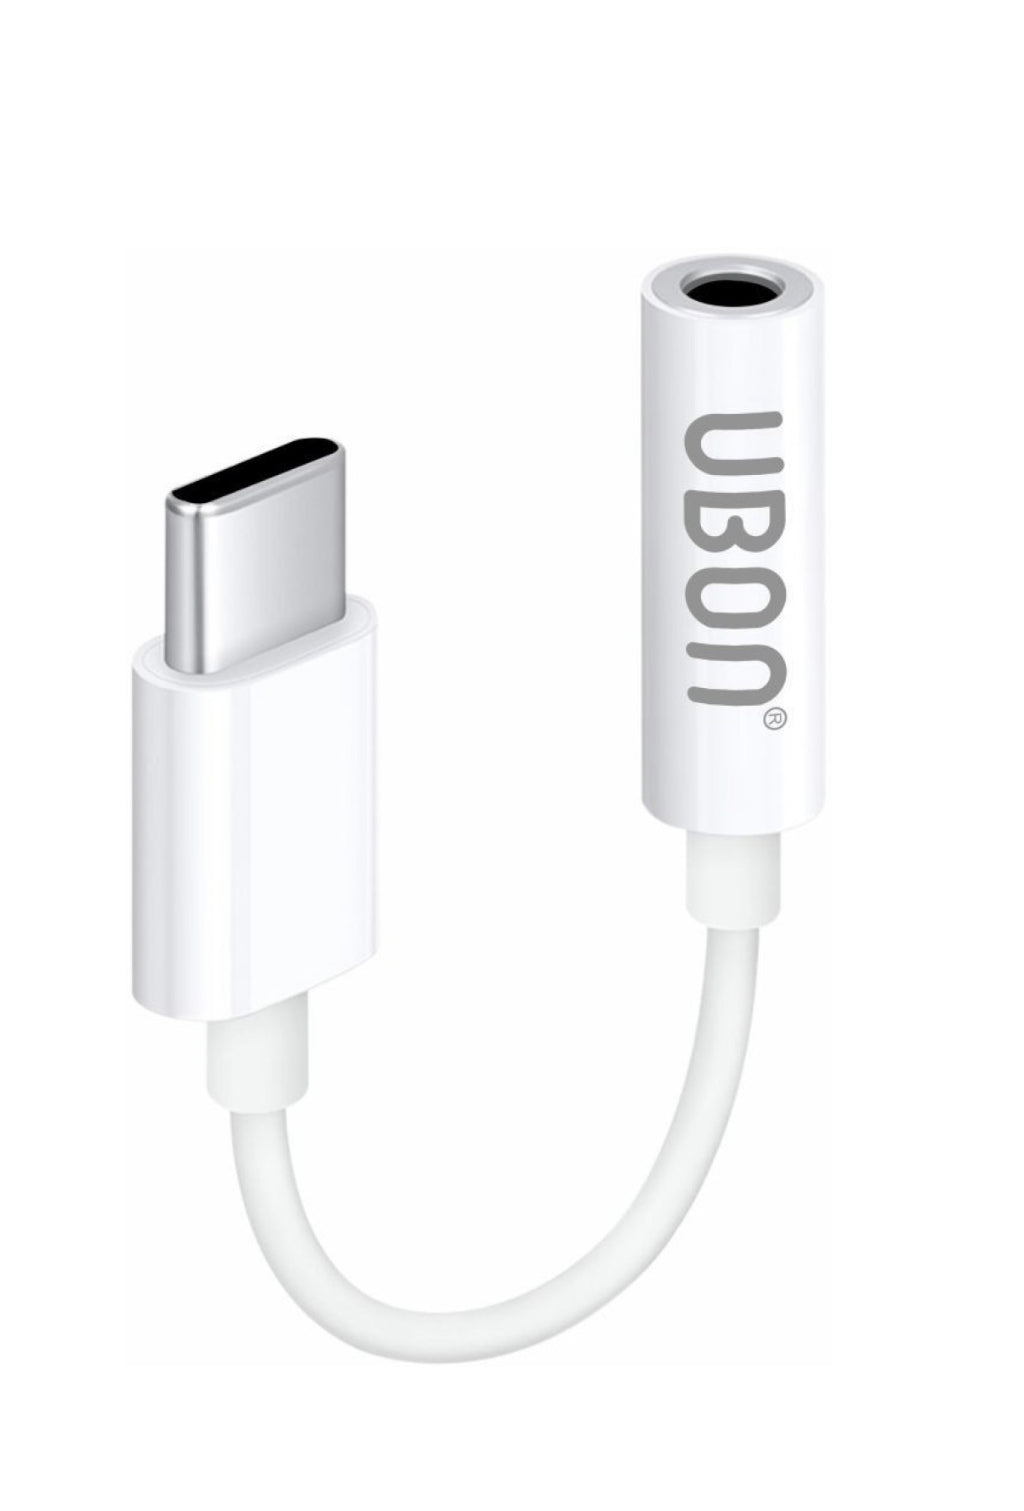 Ubon Mono Audio Cable 0.08 m WR-476 Type-C to 3.5mm Audio Connector (White) (Compatible with Mobile, Type C devices, White, One Cable)